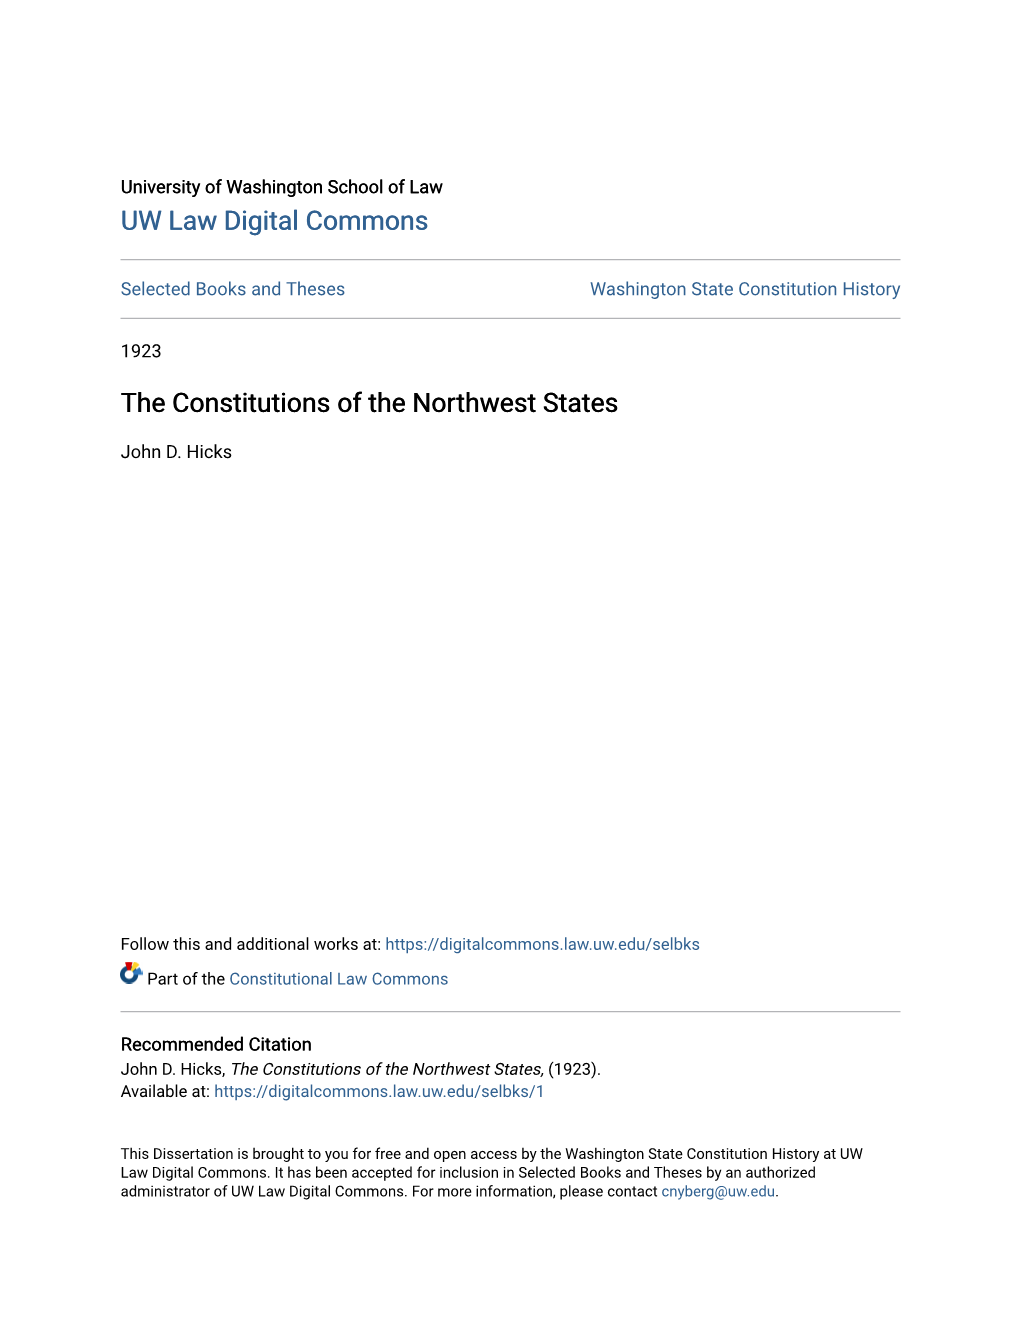 The Constitutions of the Northwest States